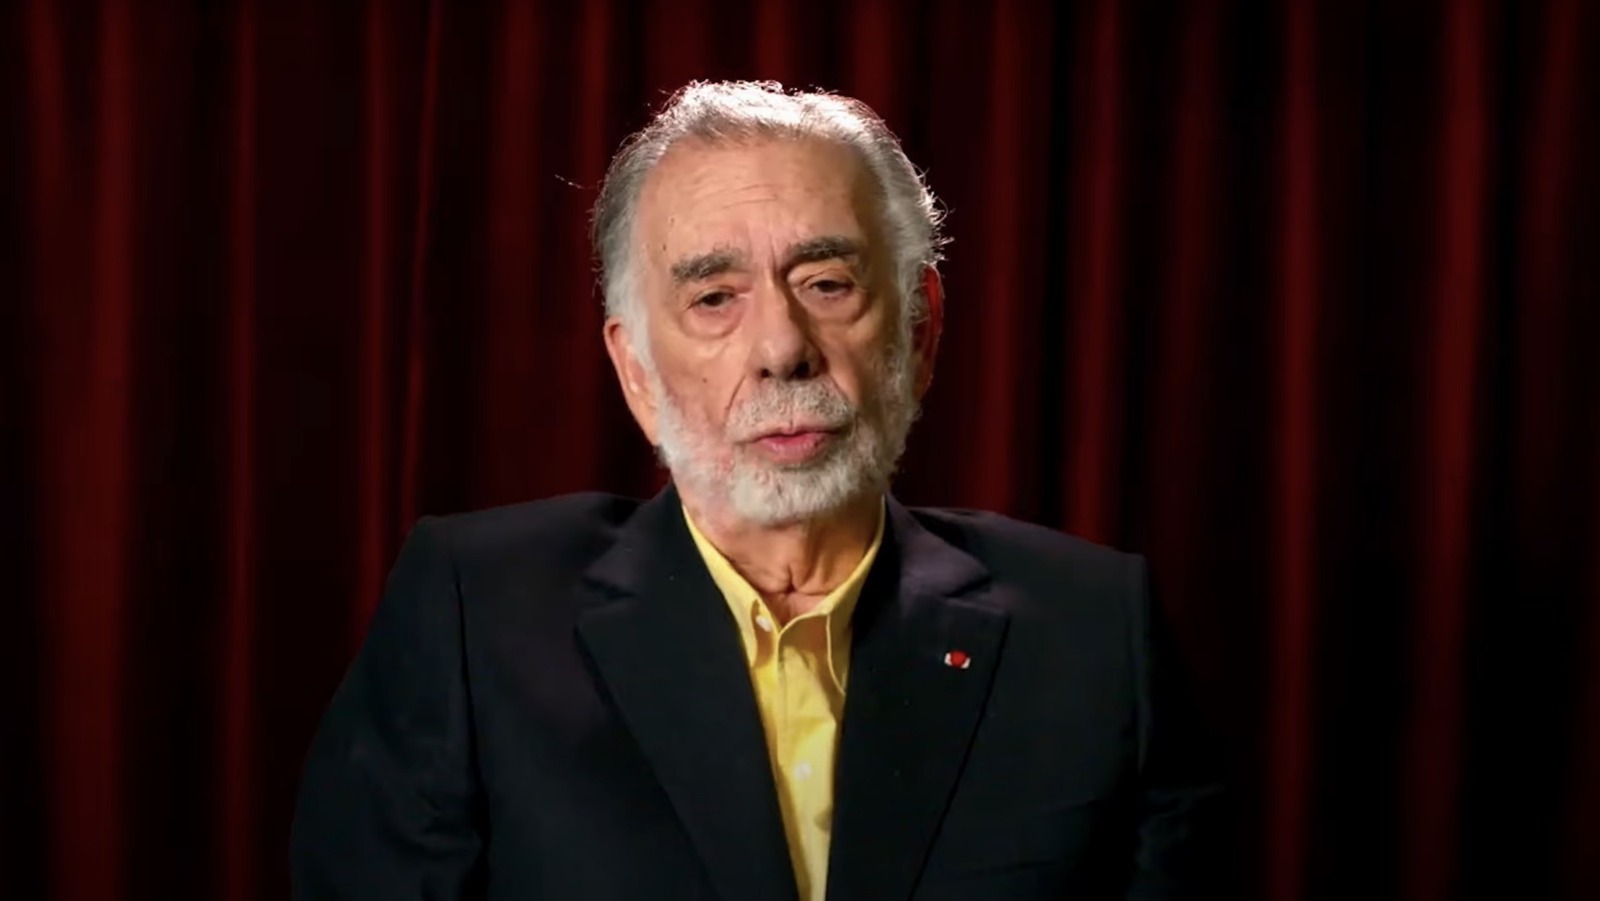 Francis Ford Coppola to Spend $120 Million of Own Money on New Film